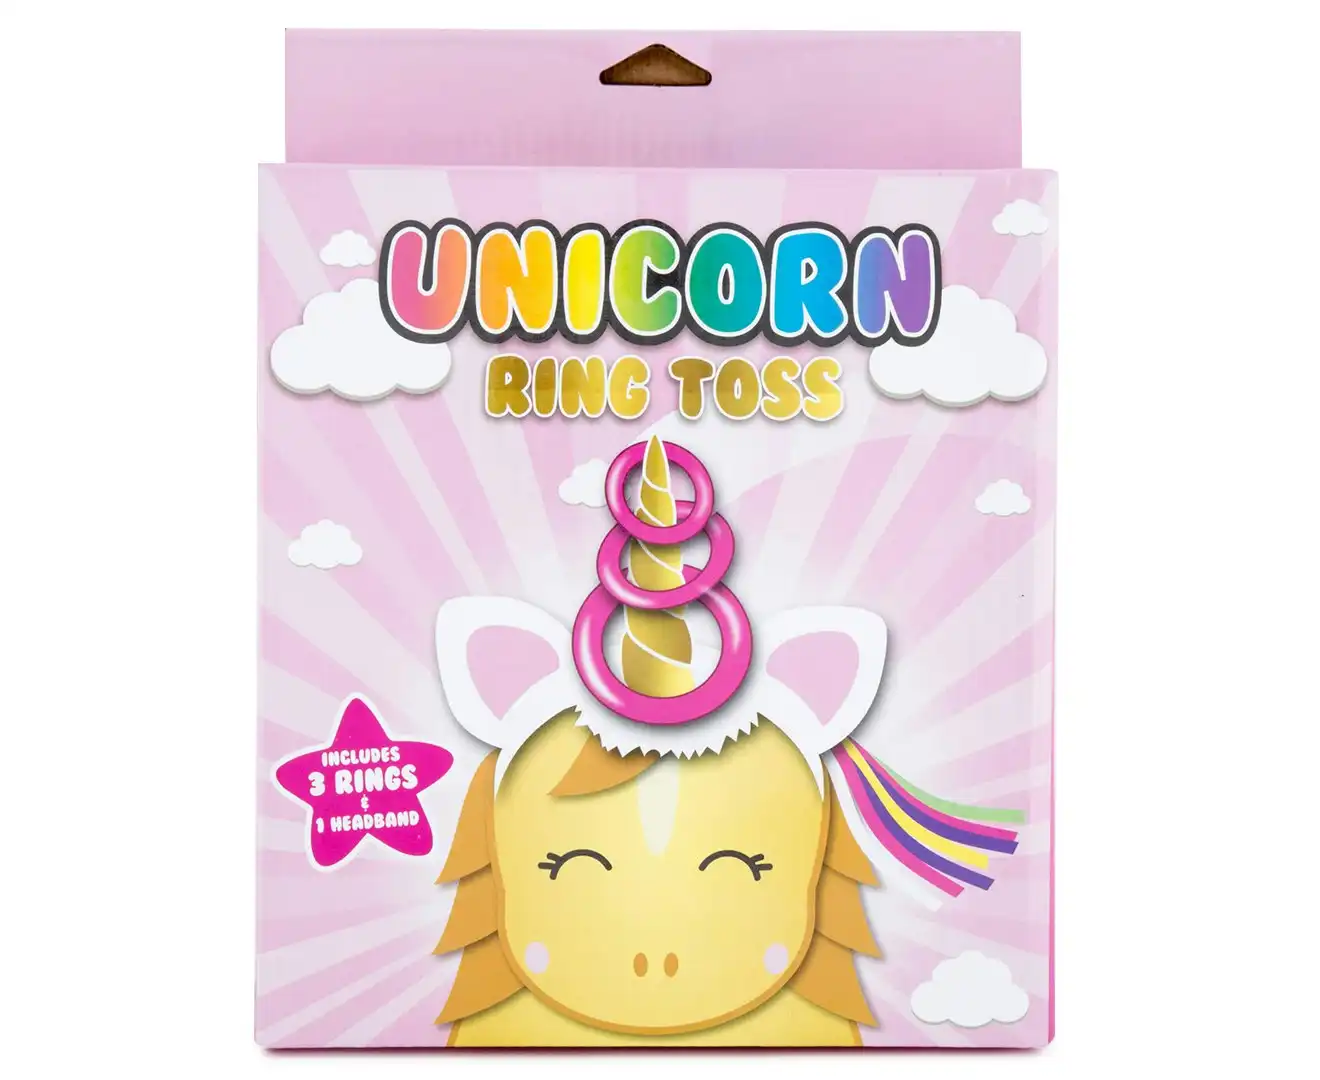 2PK Unicorn Ring Toss Game Kids/Children 3y+ Party Activity Toys Headband/Rings